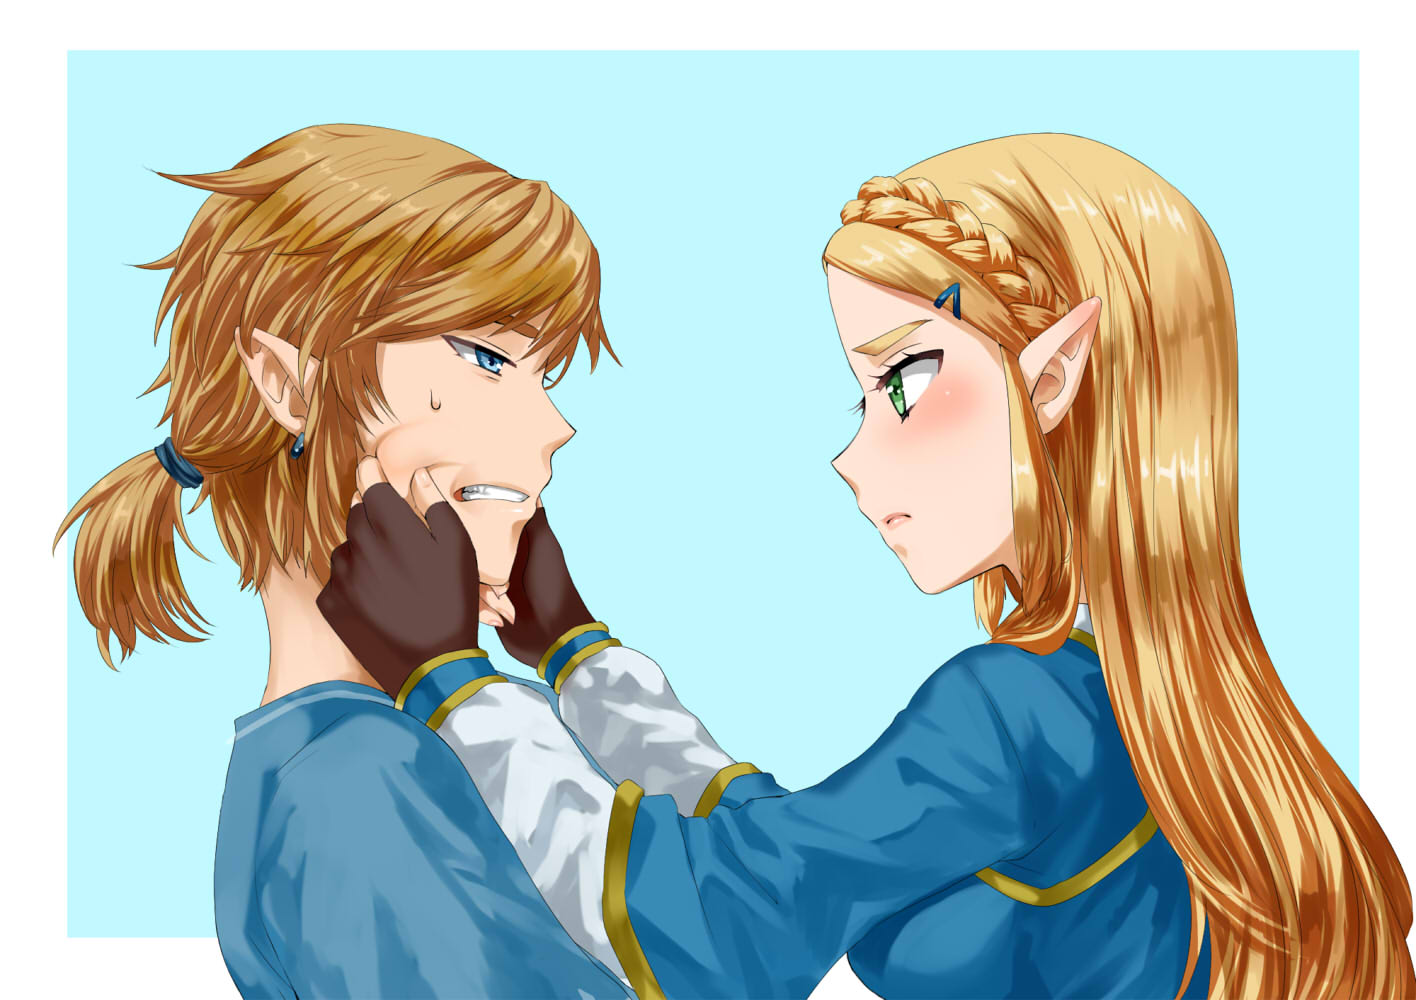 Link and Zelda by わさび